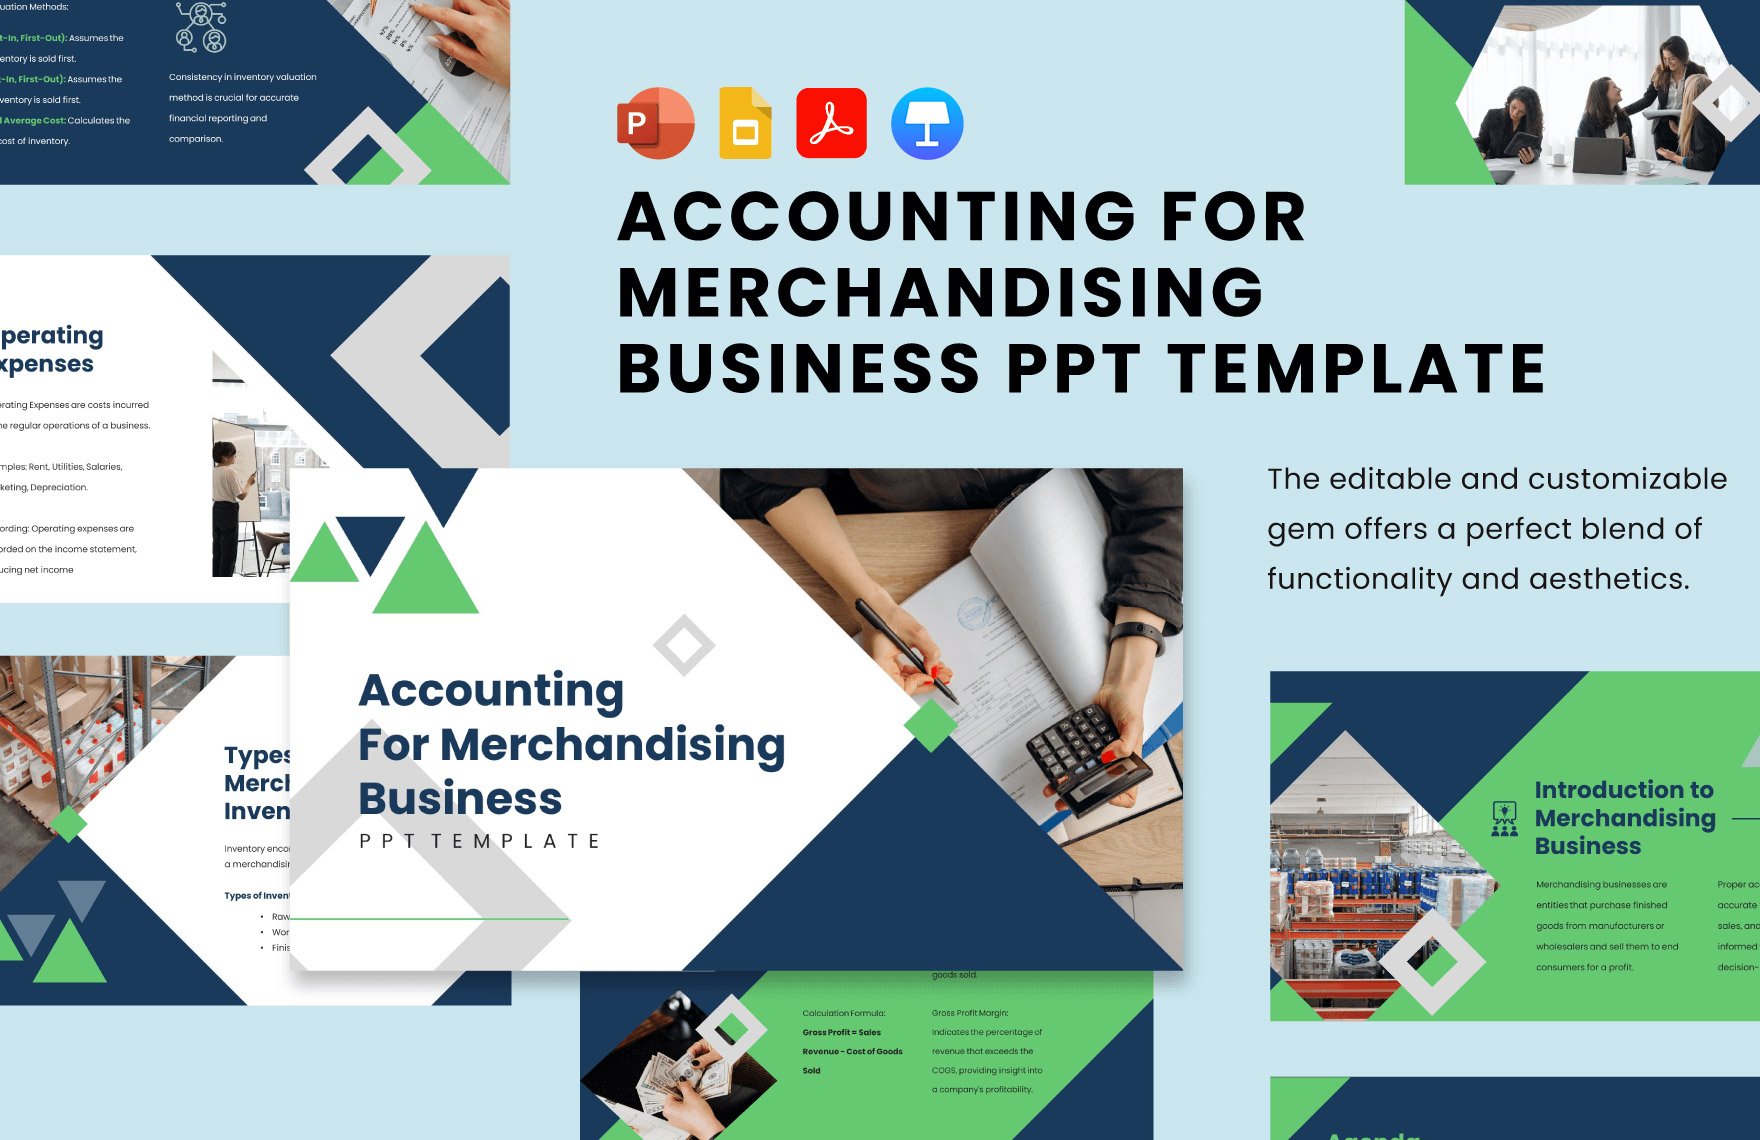 Accounting for Merchandising Business PPT Template in PDF, PowerPoint, Google Slides, Apple Keynote